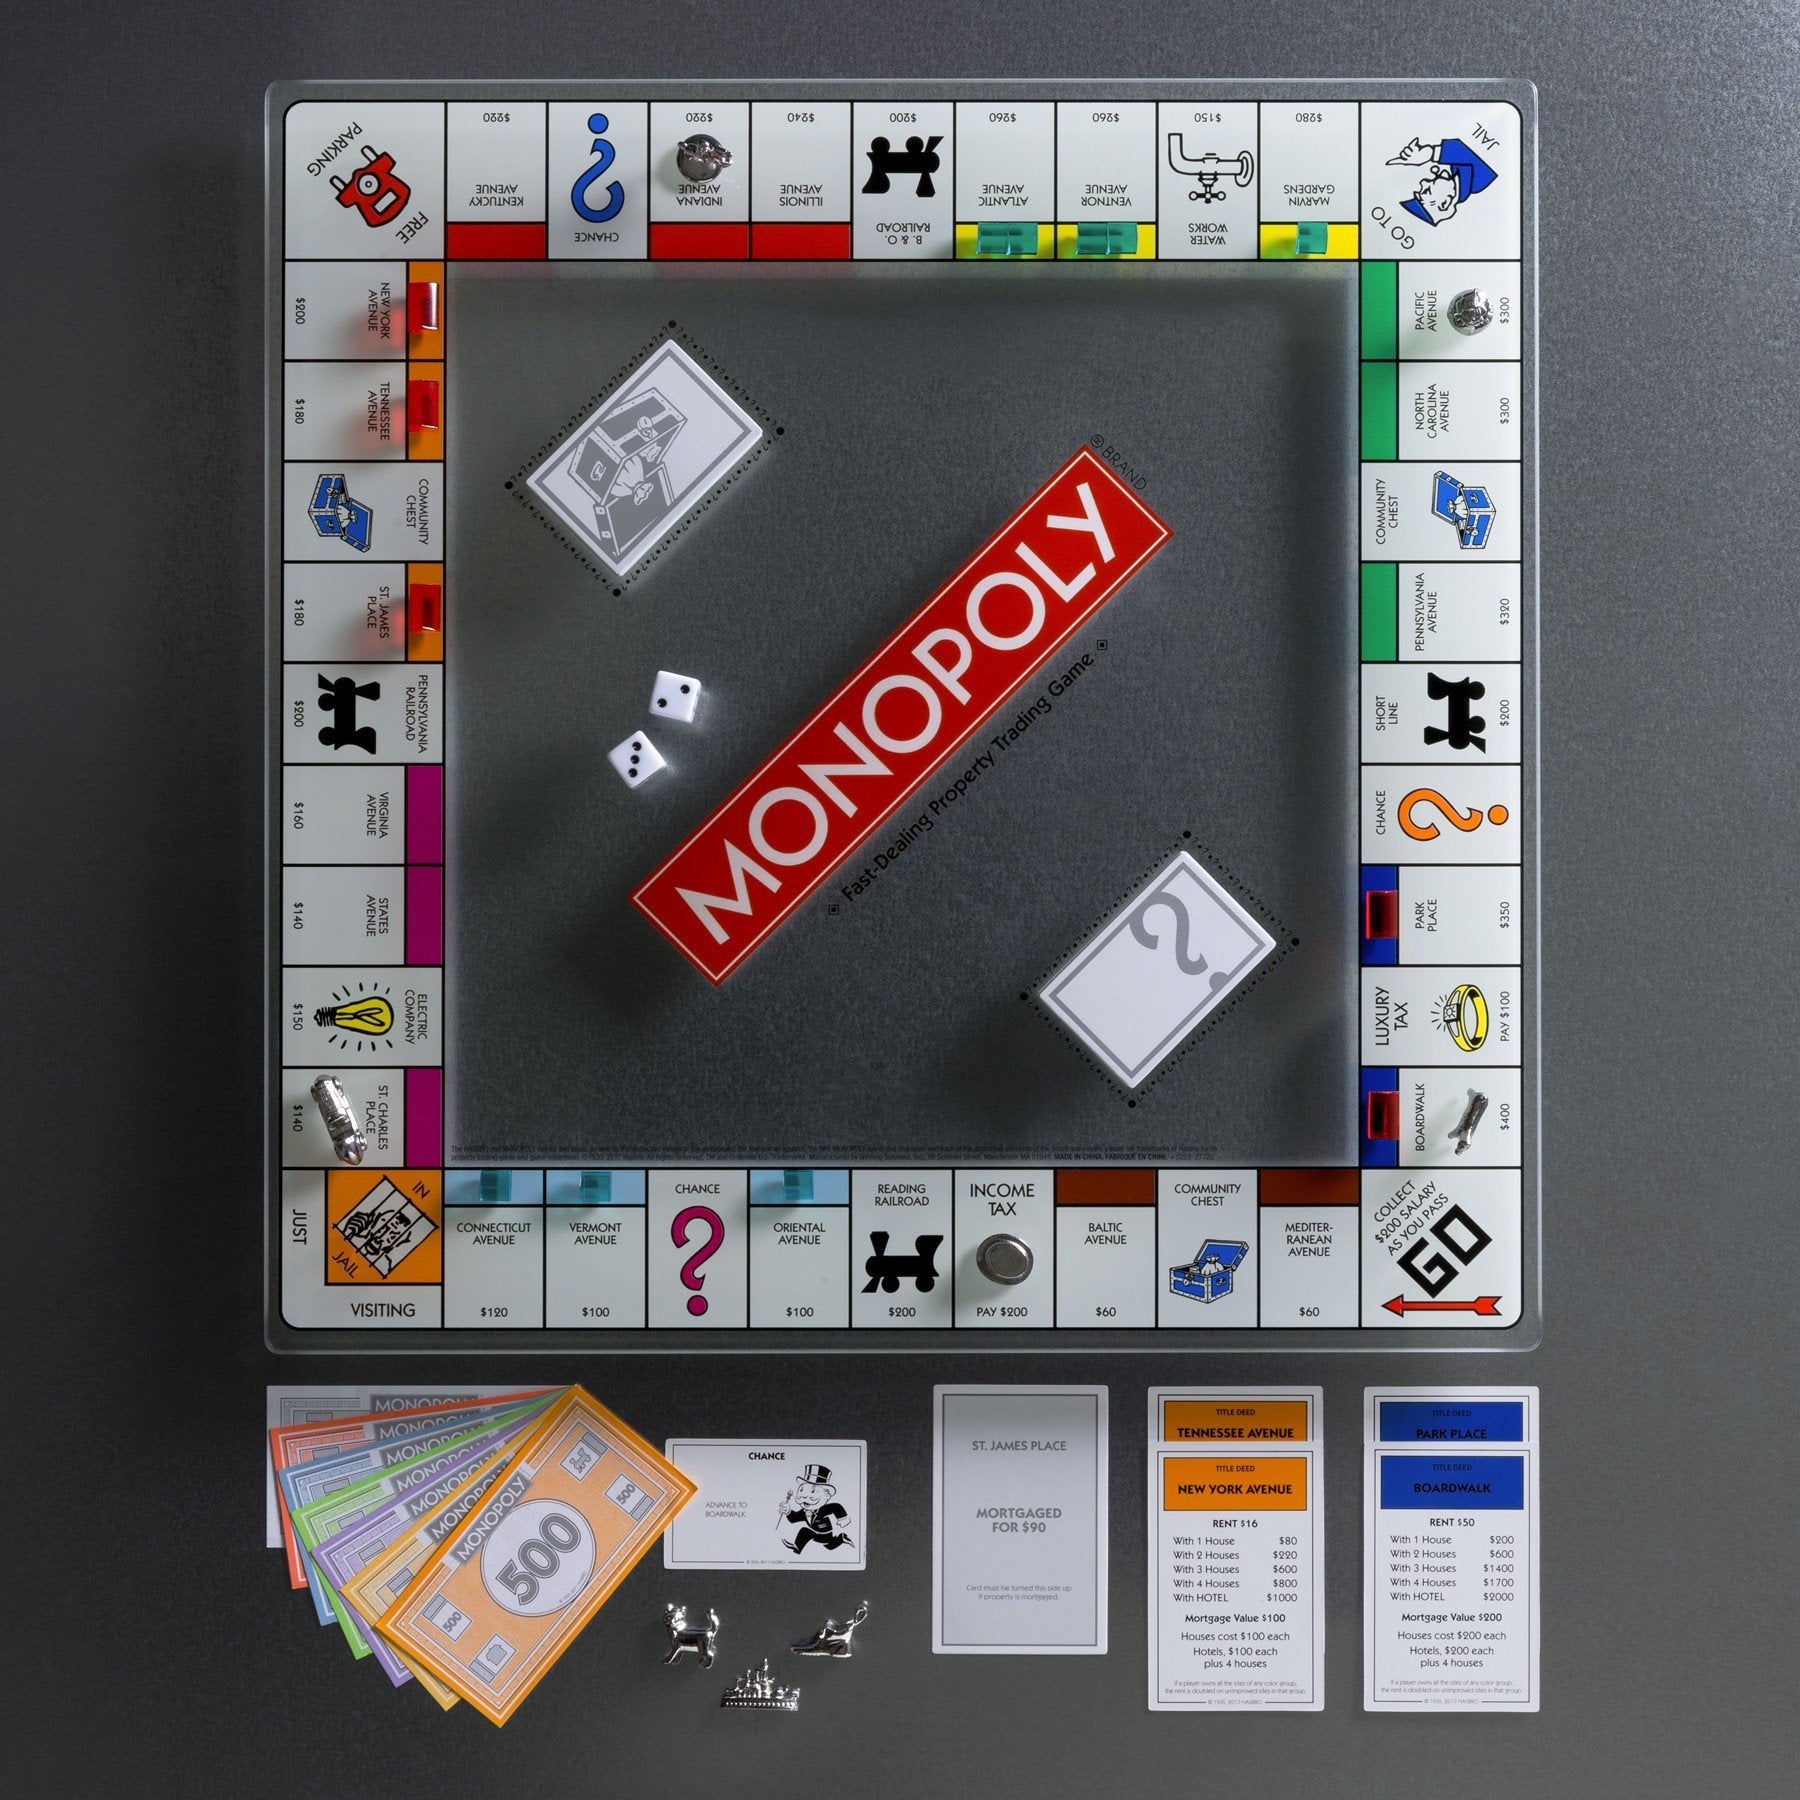 Monopoly, Glass Edition